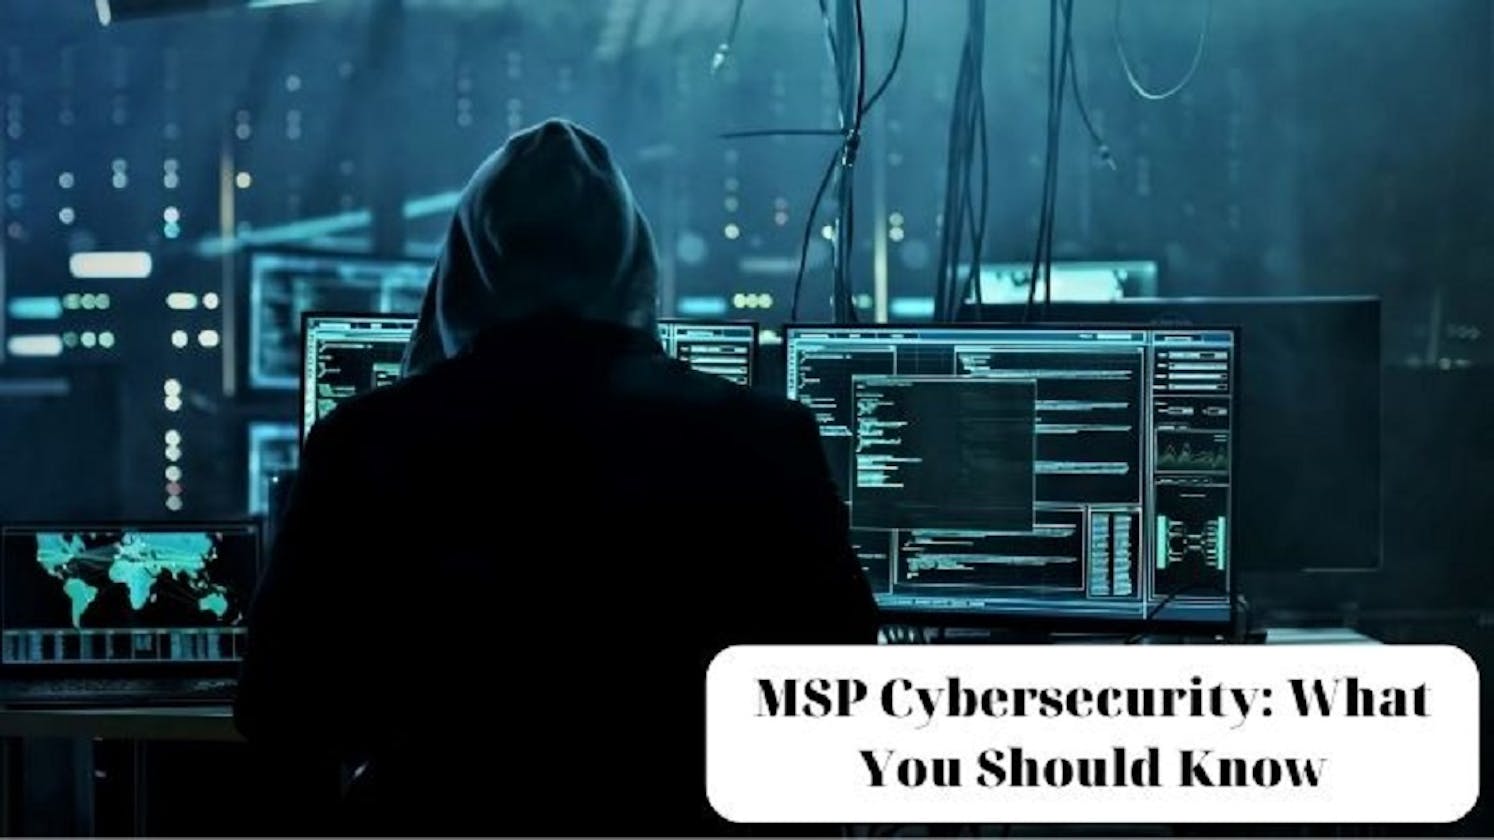 MSP Cybersecurity: What You Should Know